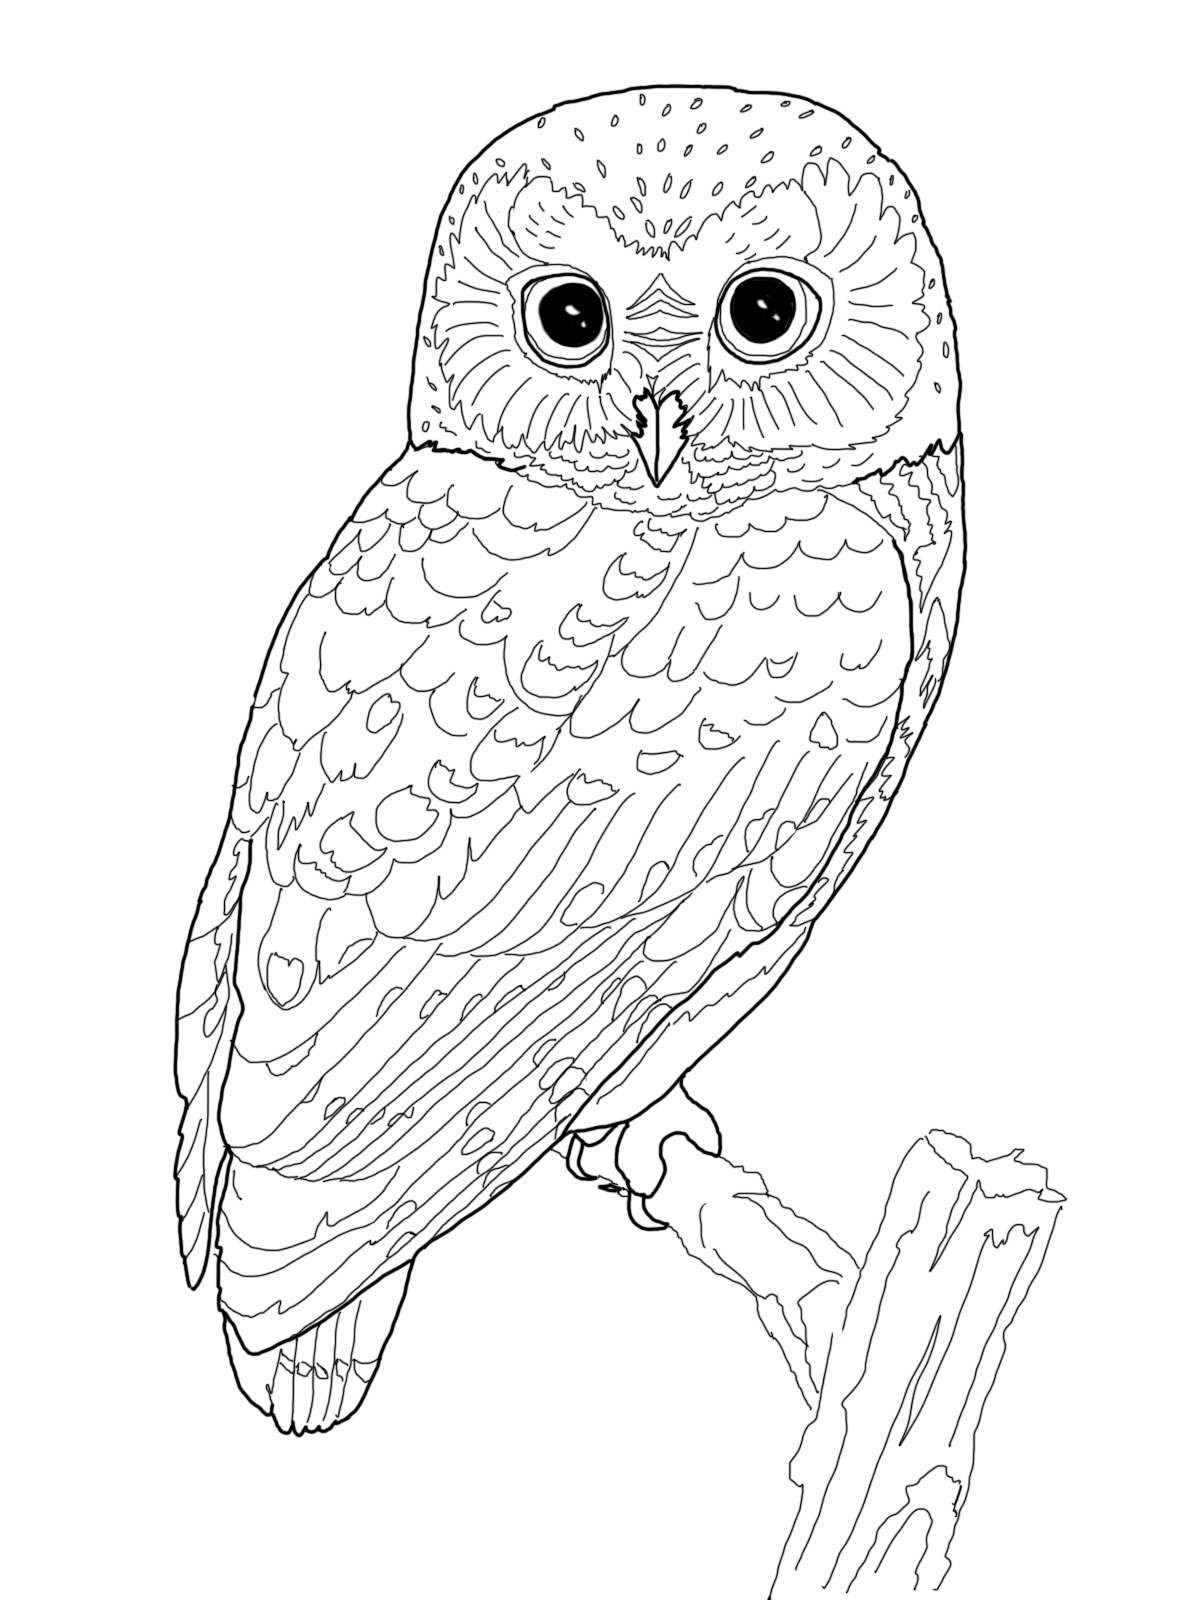 Owl Coloring Book For Adults
 Barn Owl Coloring Pages For Adults